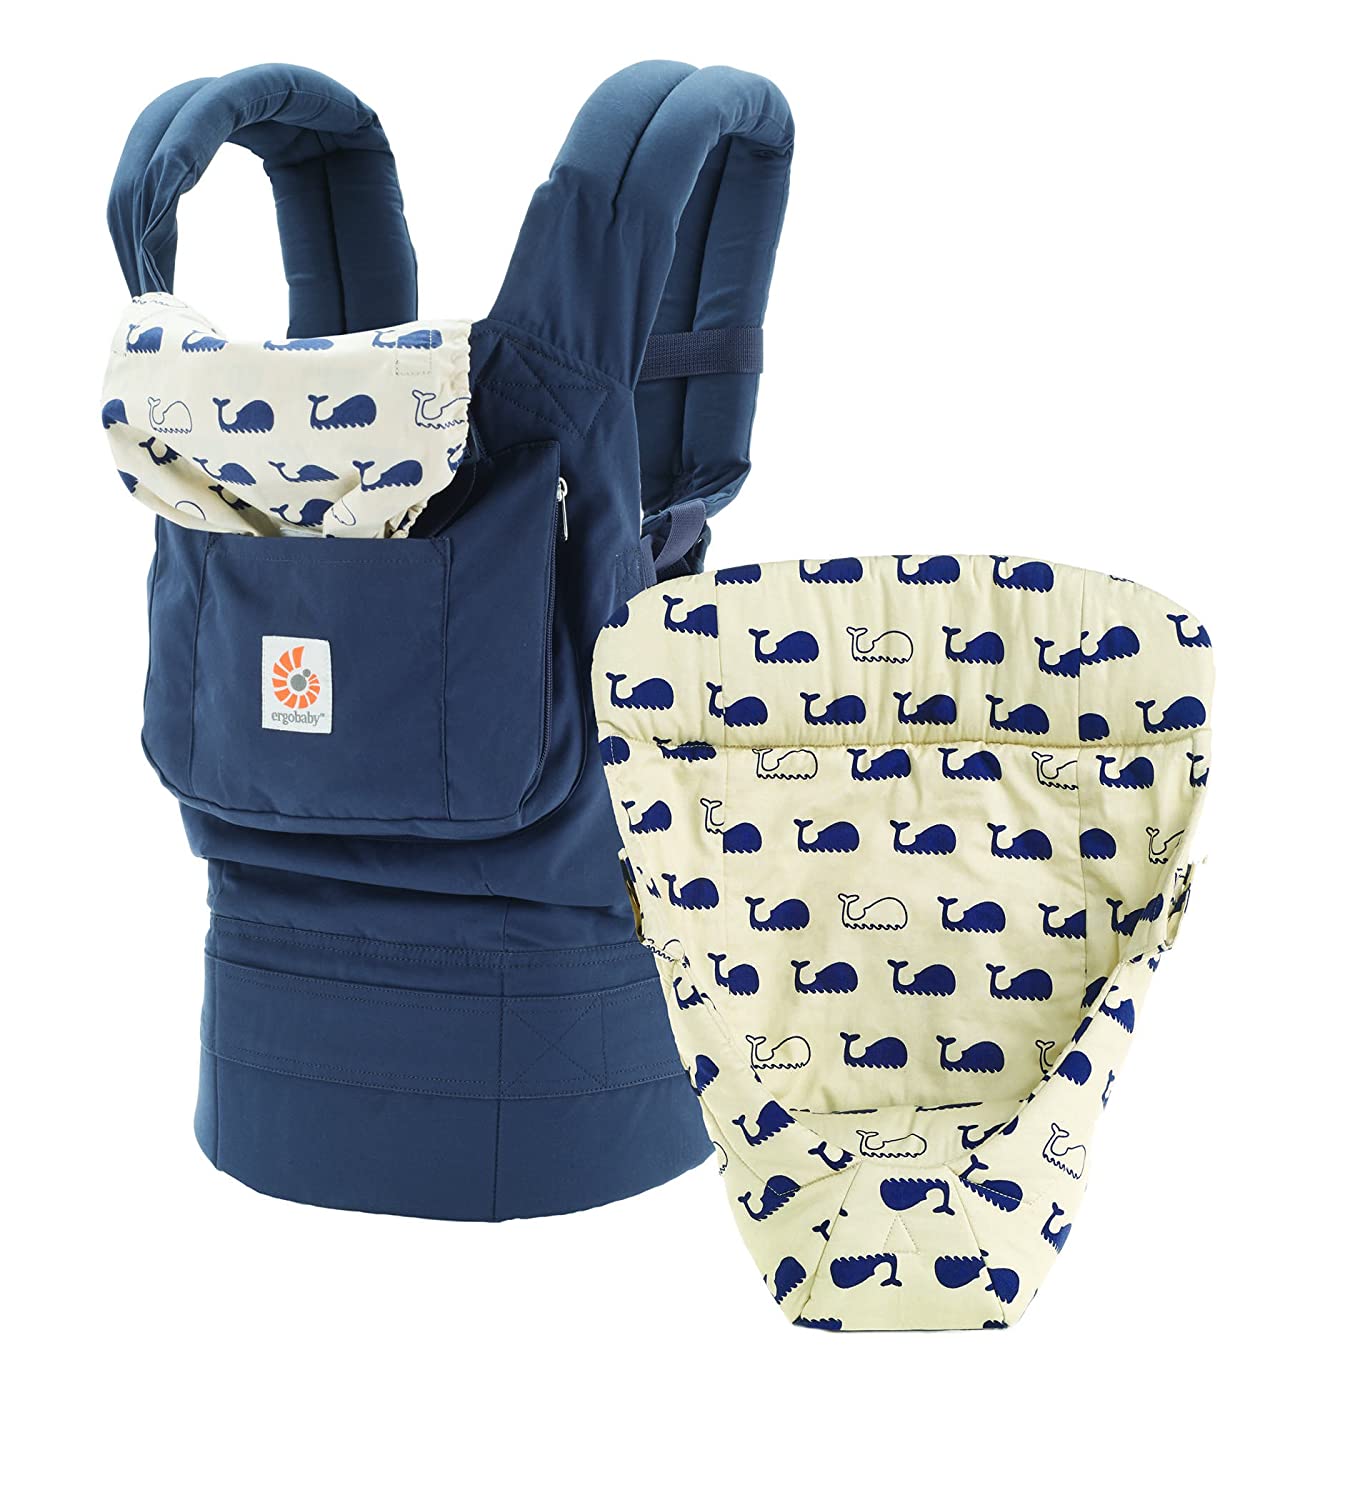 ERGObaby Original Collection Baby Carrier – From Birth Package (3.2 kg) Blue blue